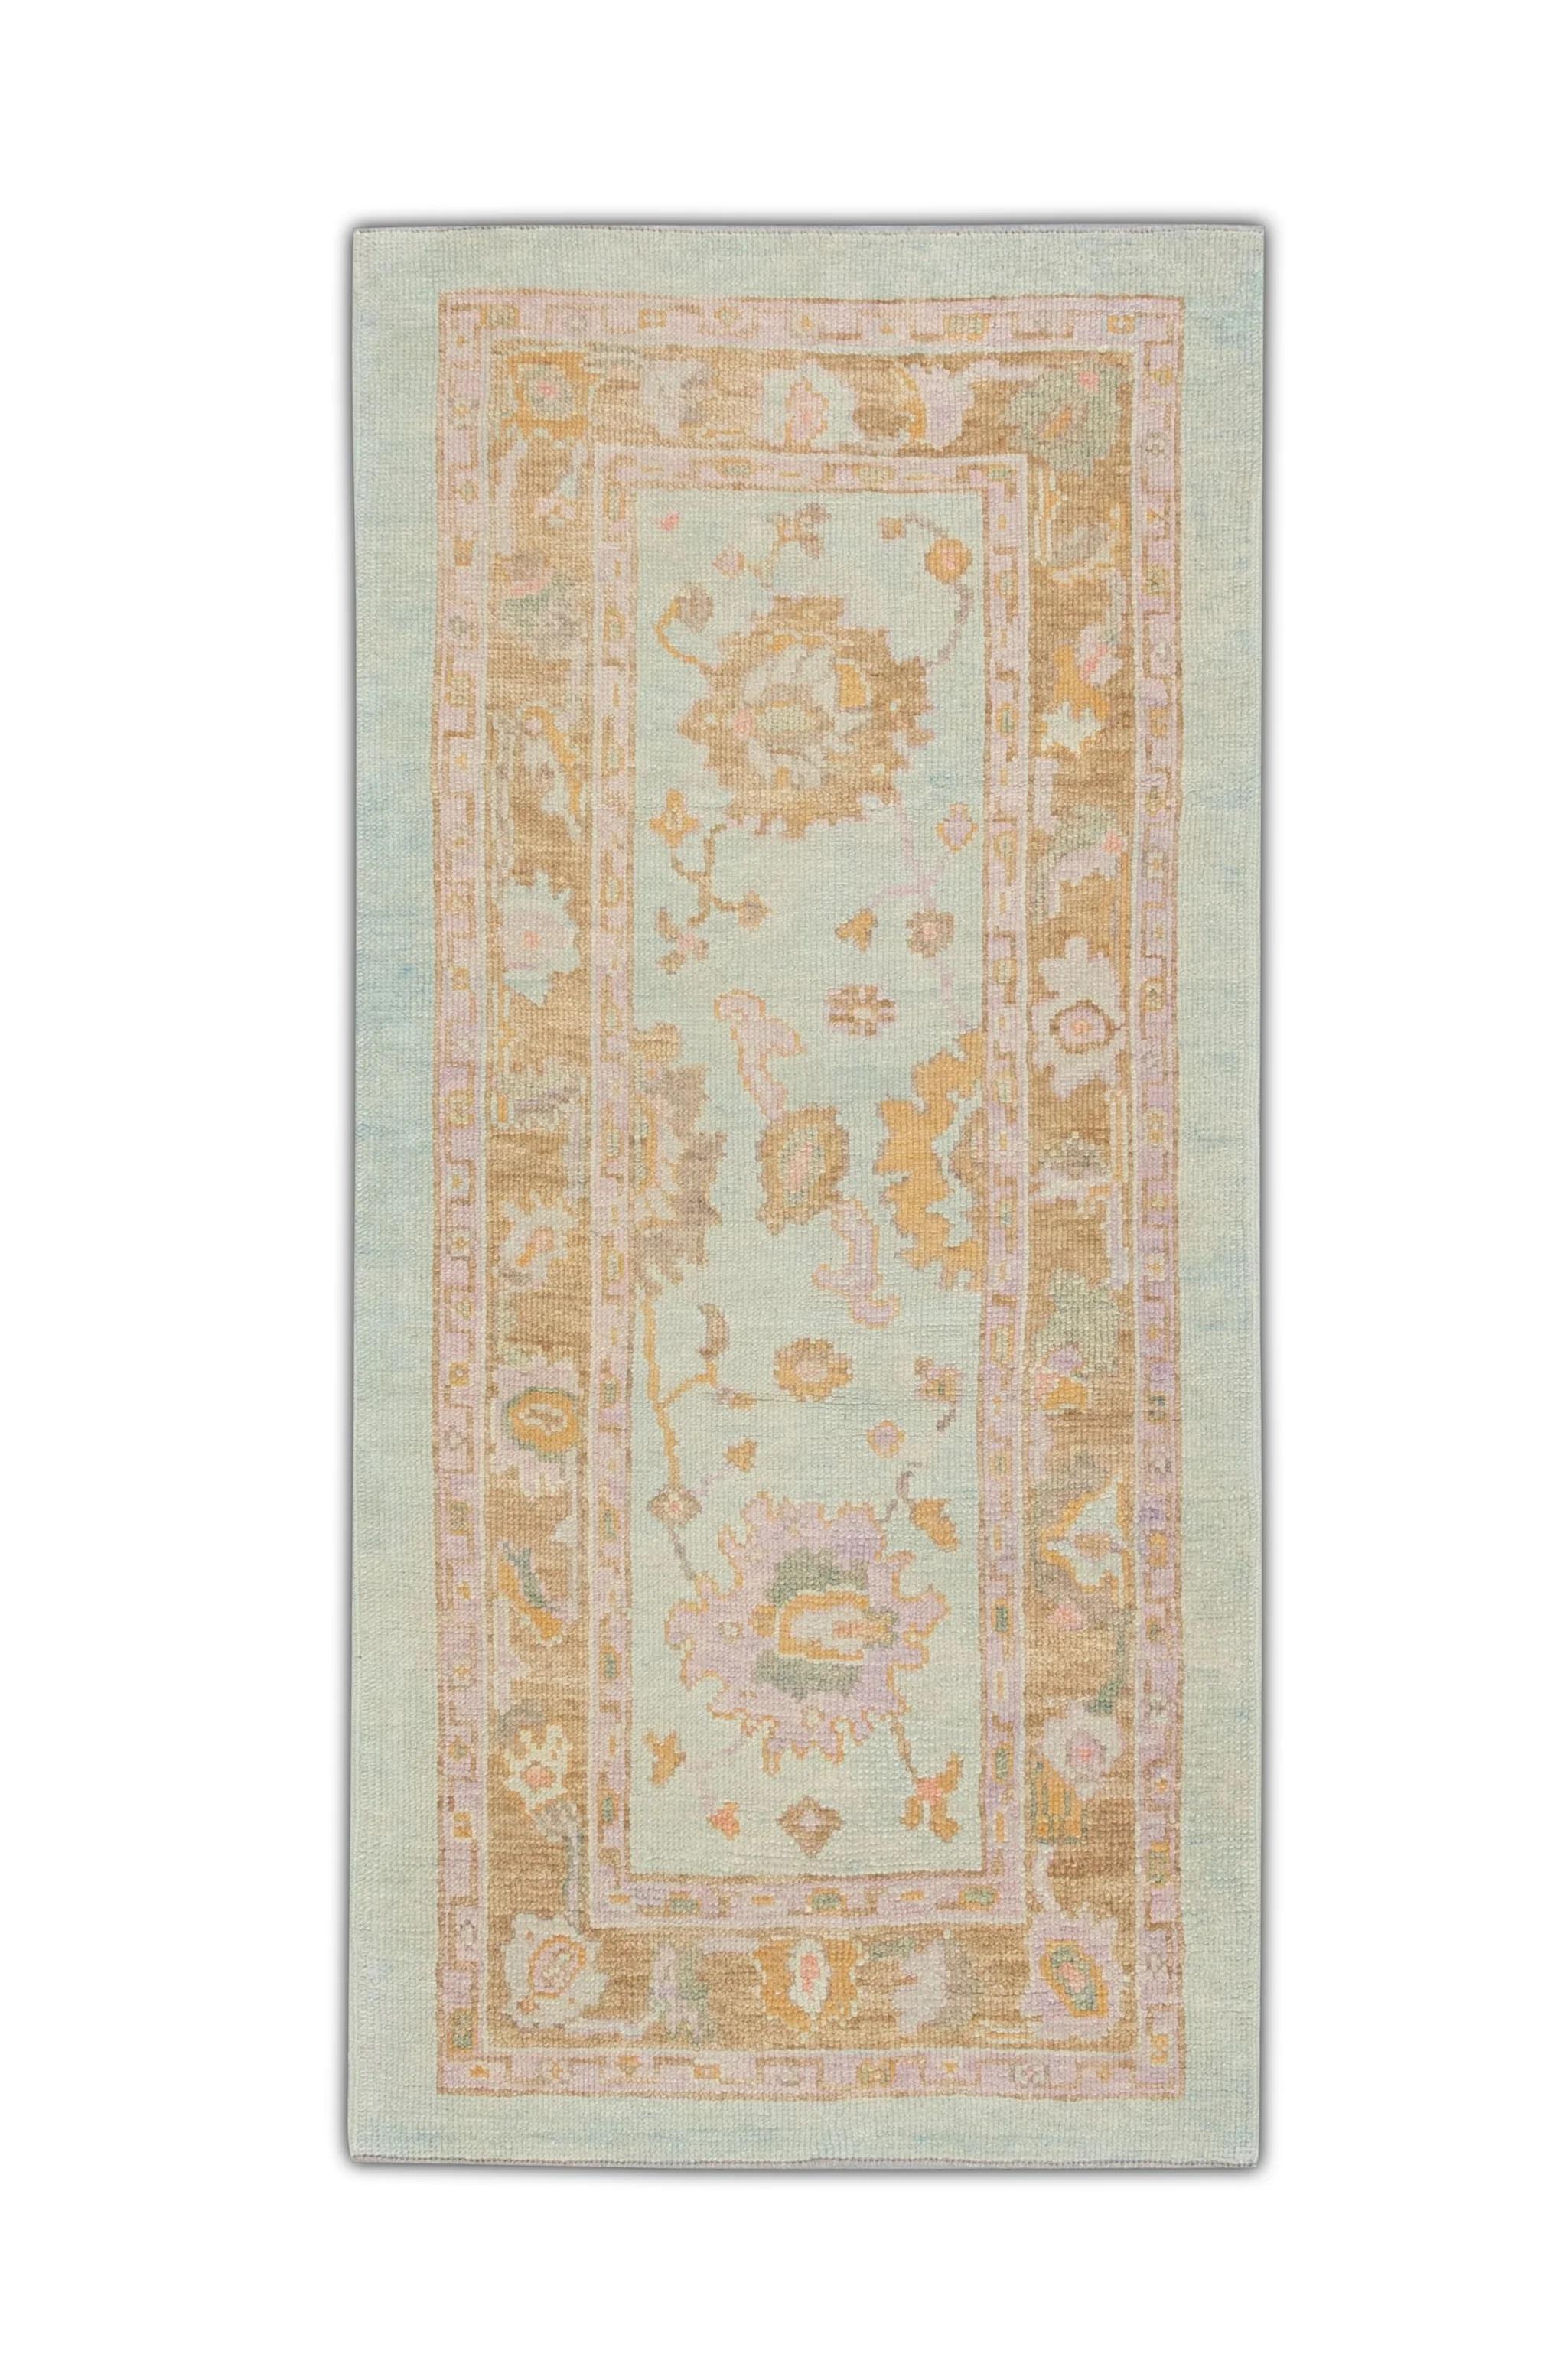 Soft Blue Handwoven Wool Turkish Oushak Rug with Colorful Floral Design 3' x 6'3 For Sale 4